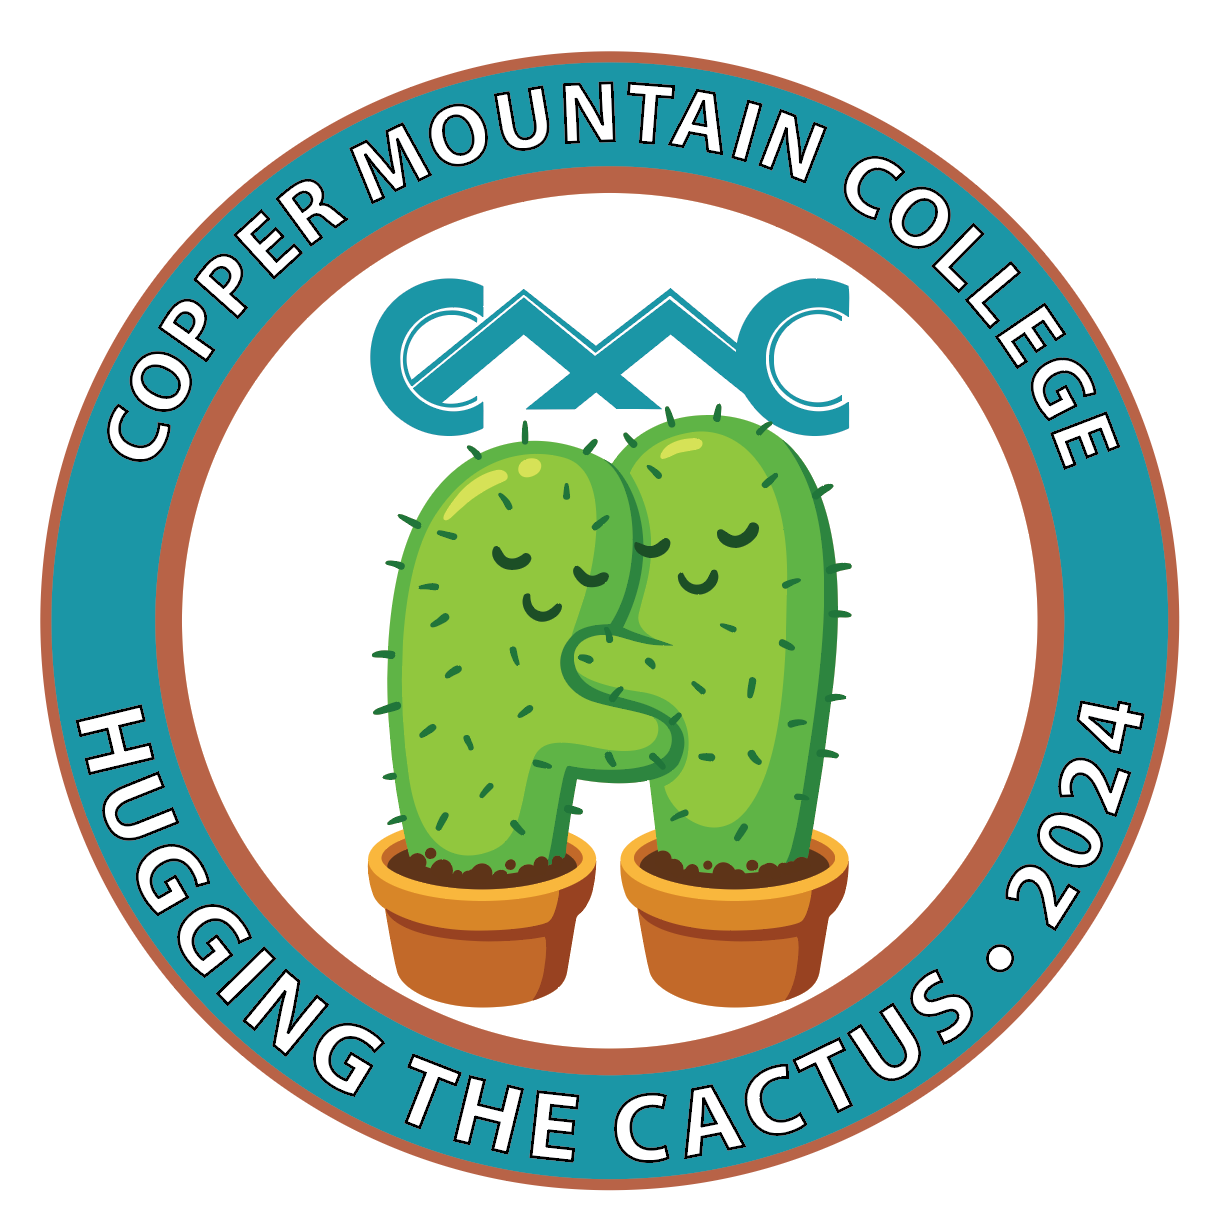 Hugging the Cactus conference logo